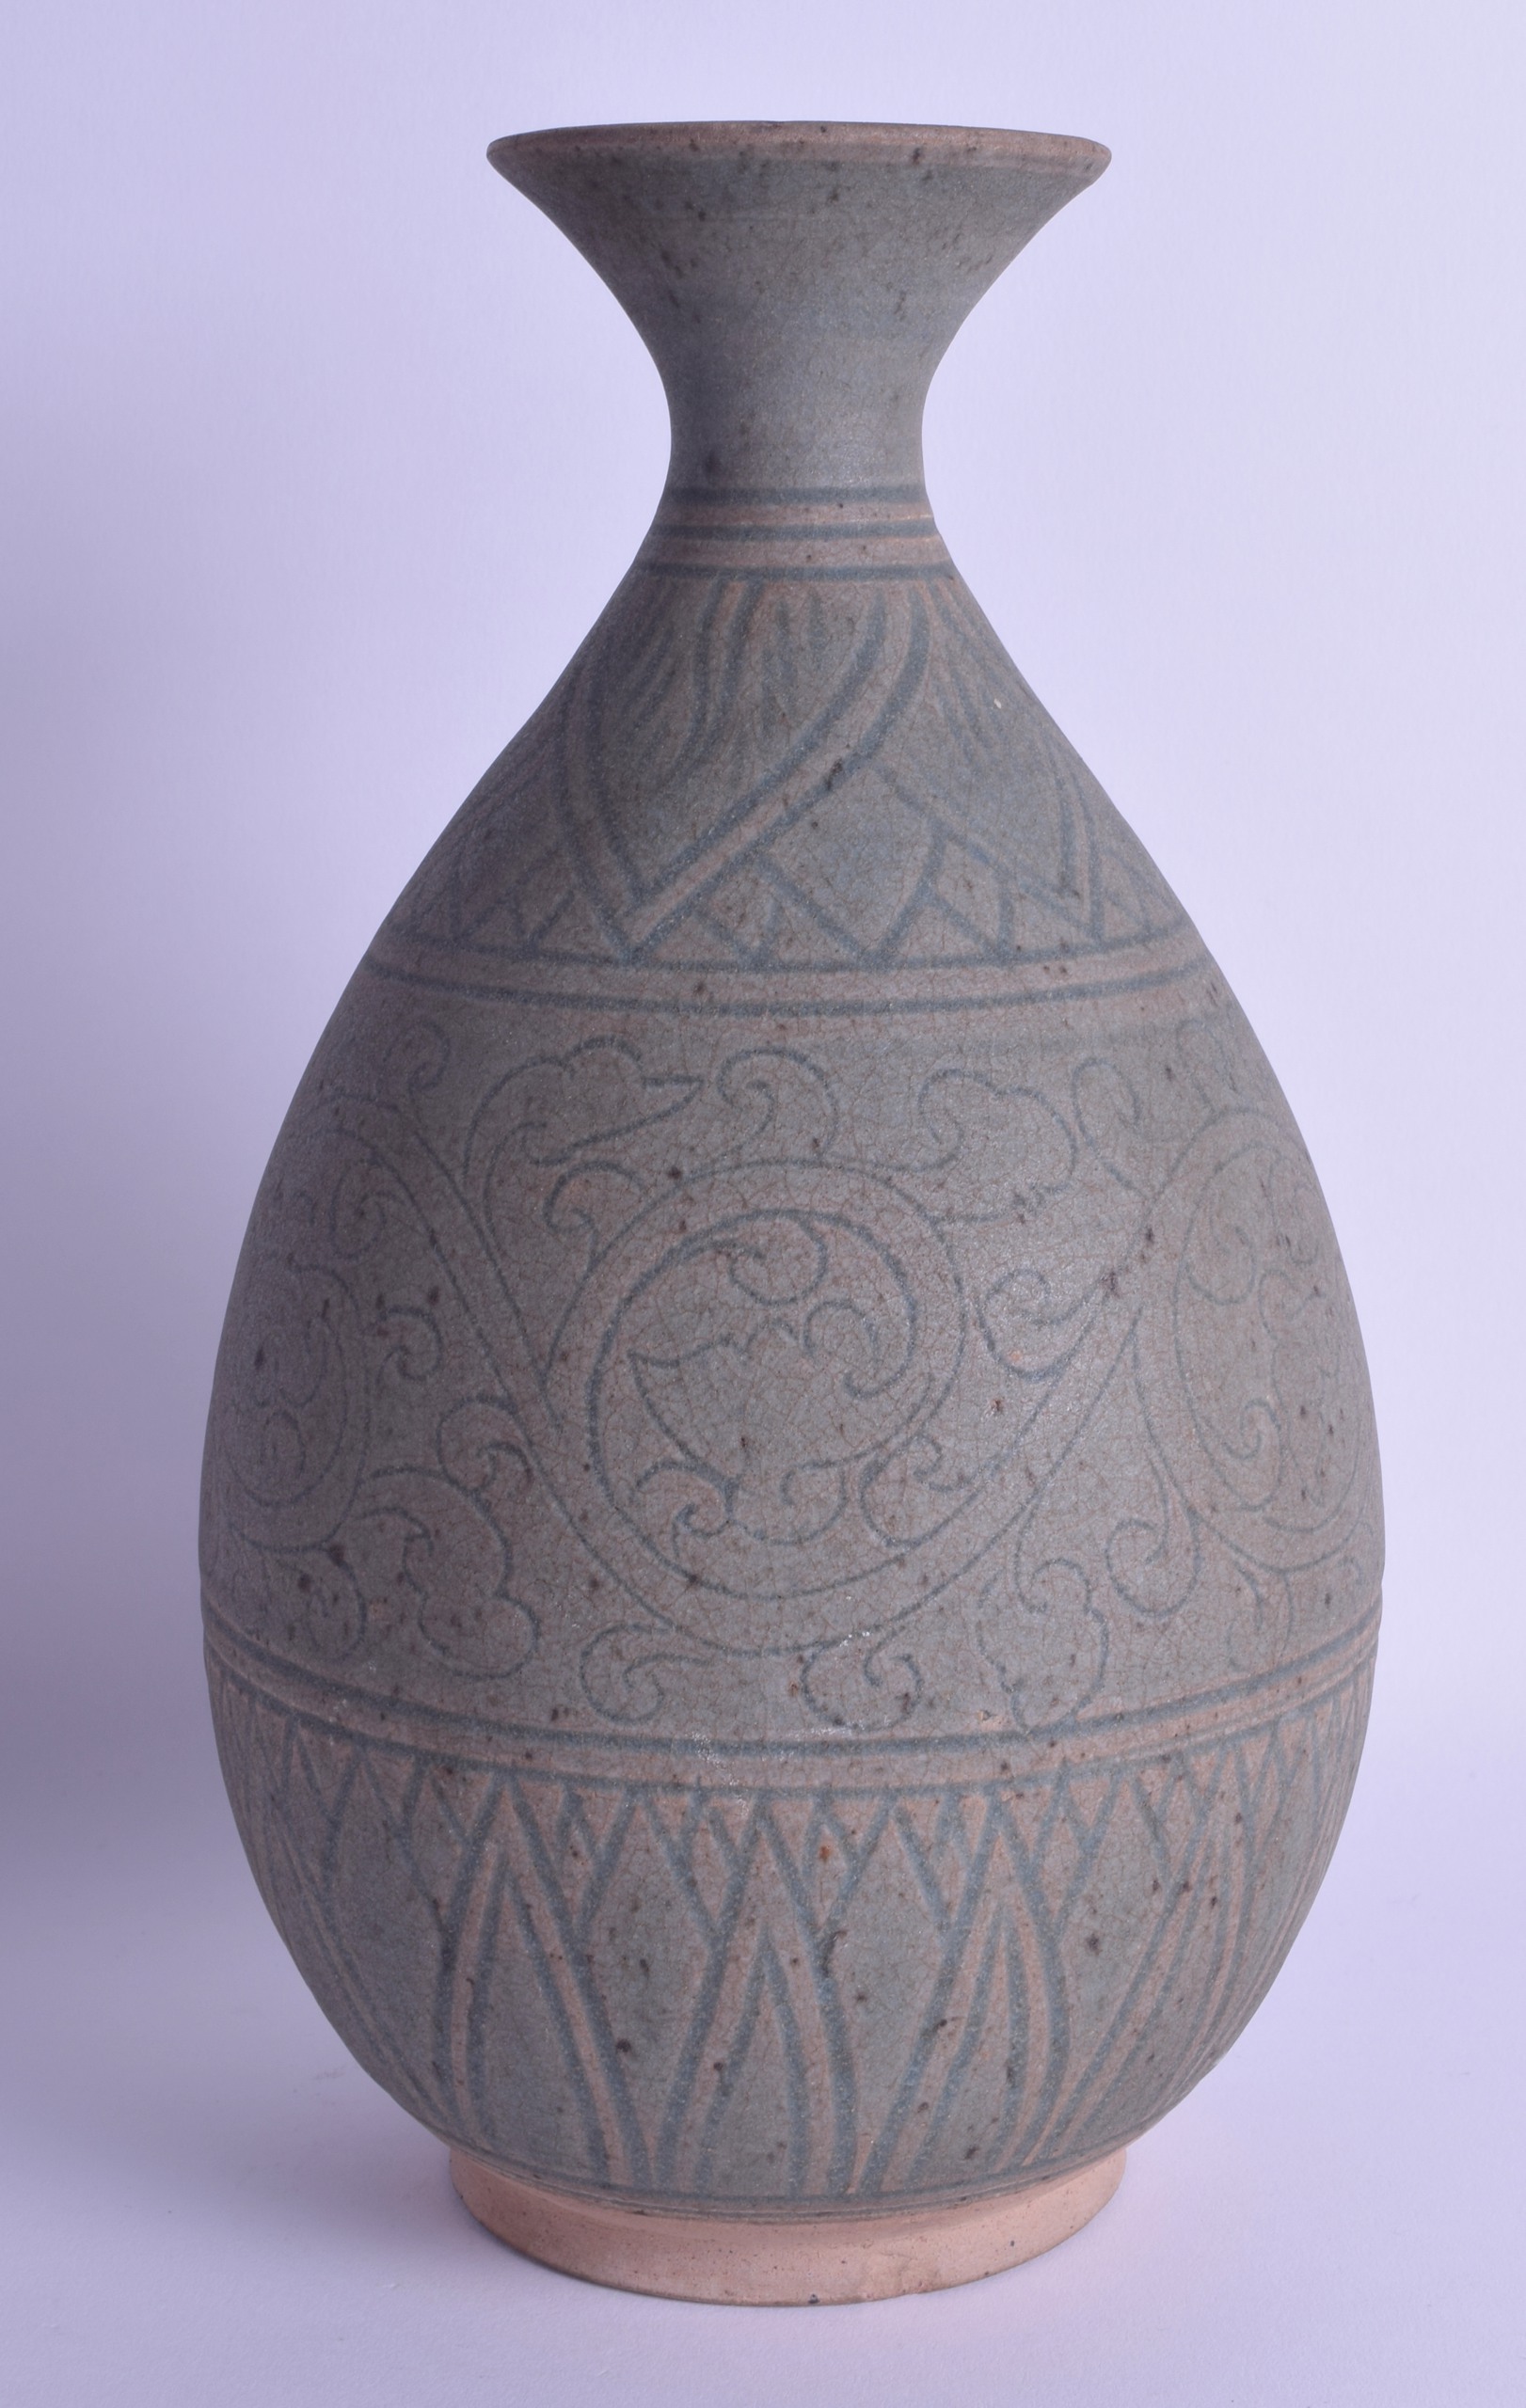 A CHINESE CHIZOU TYPE ENGRAVED POTTERY VASE possibly Ming, decorated with swirling floral vines